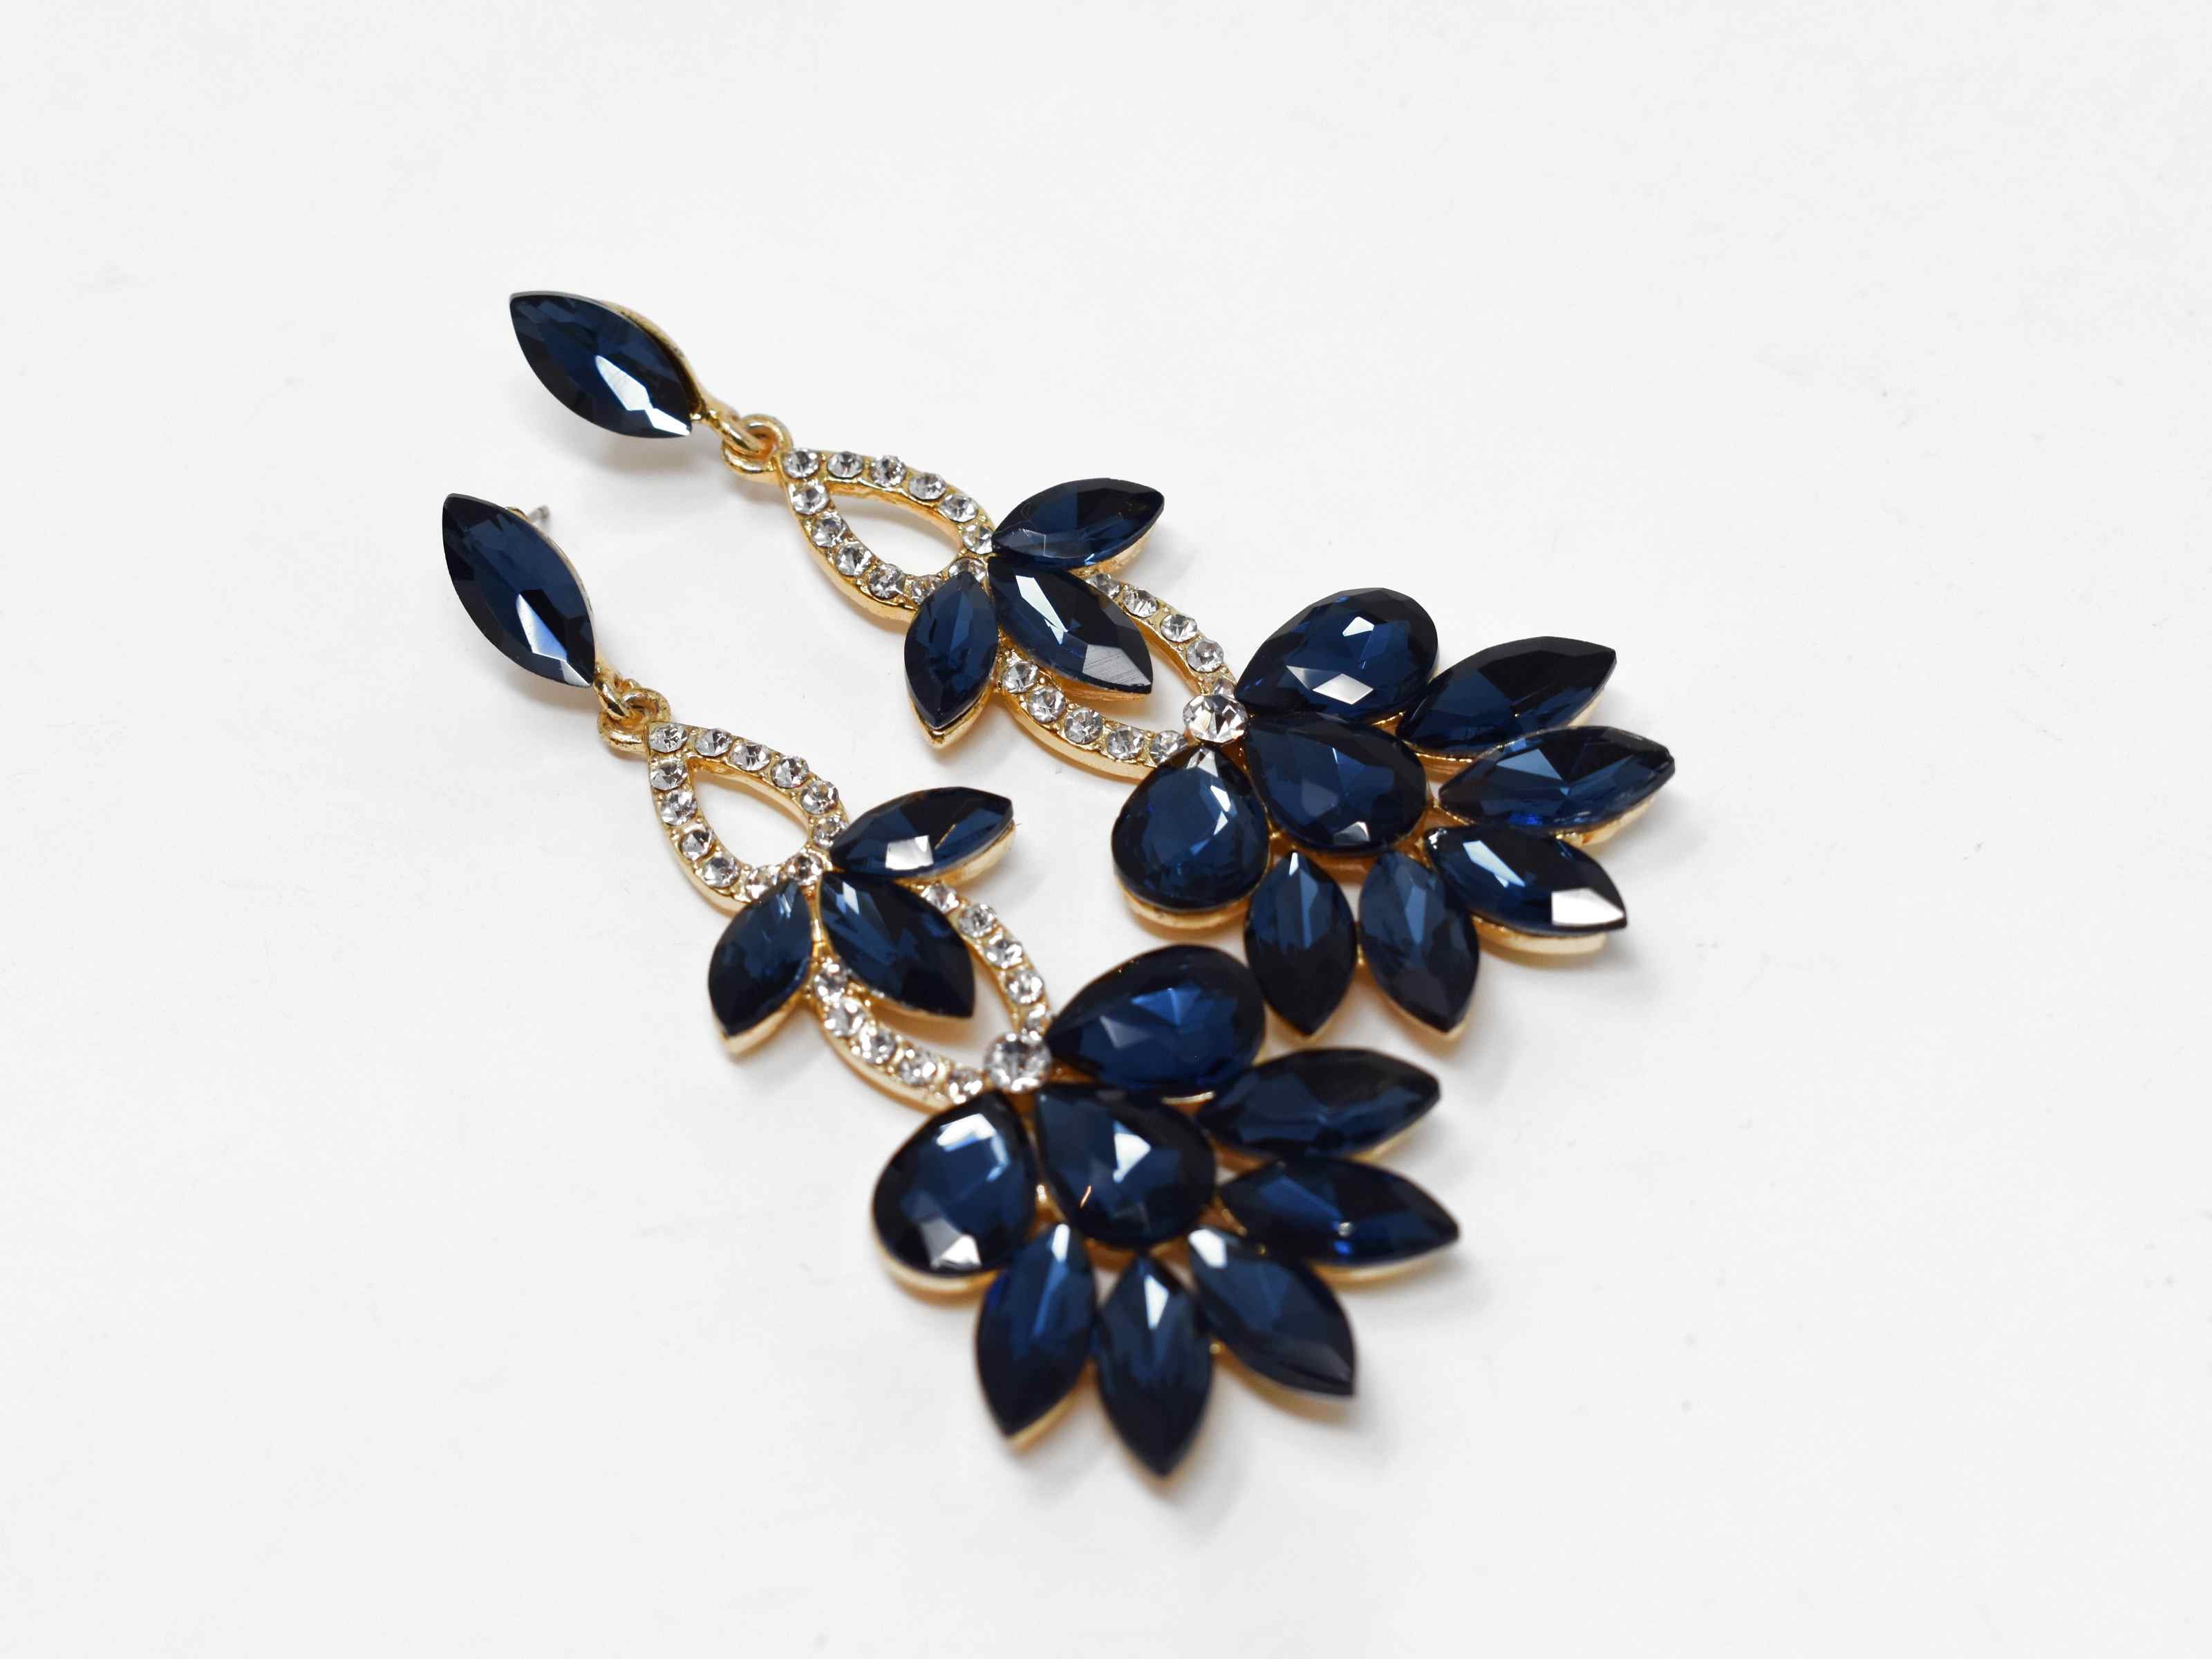 Stunning and beautifully crafted. Our hydrangea gold earrings are a drop dangle earring with big blue sapphire colored stones and smaller clear stones. It is 3 1/2 inches in length with a push back clasp.